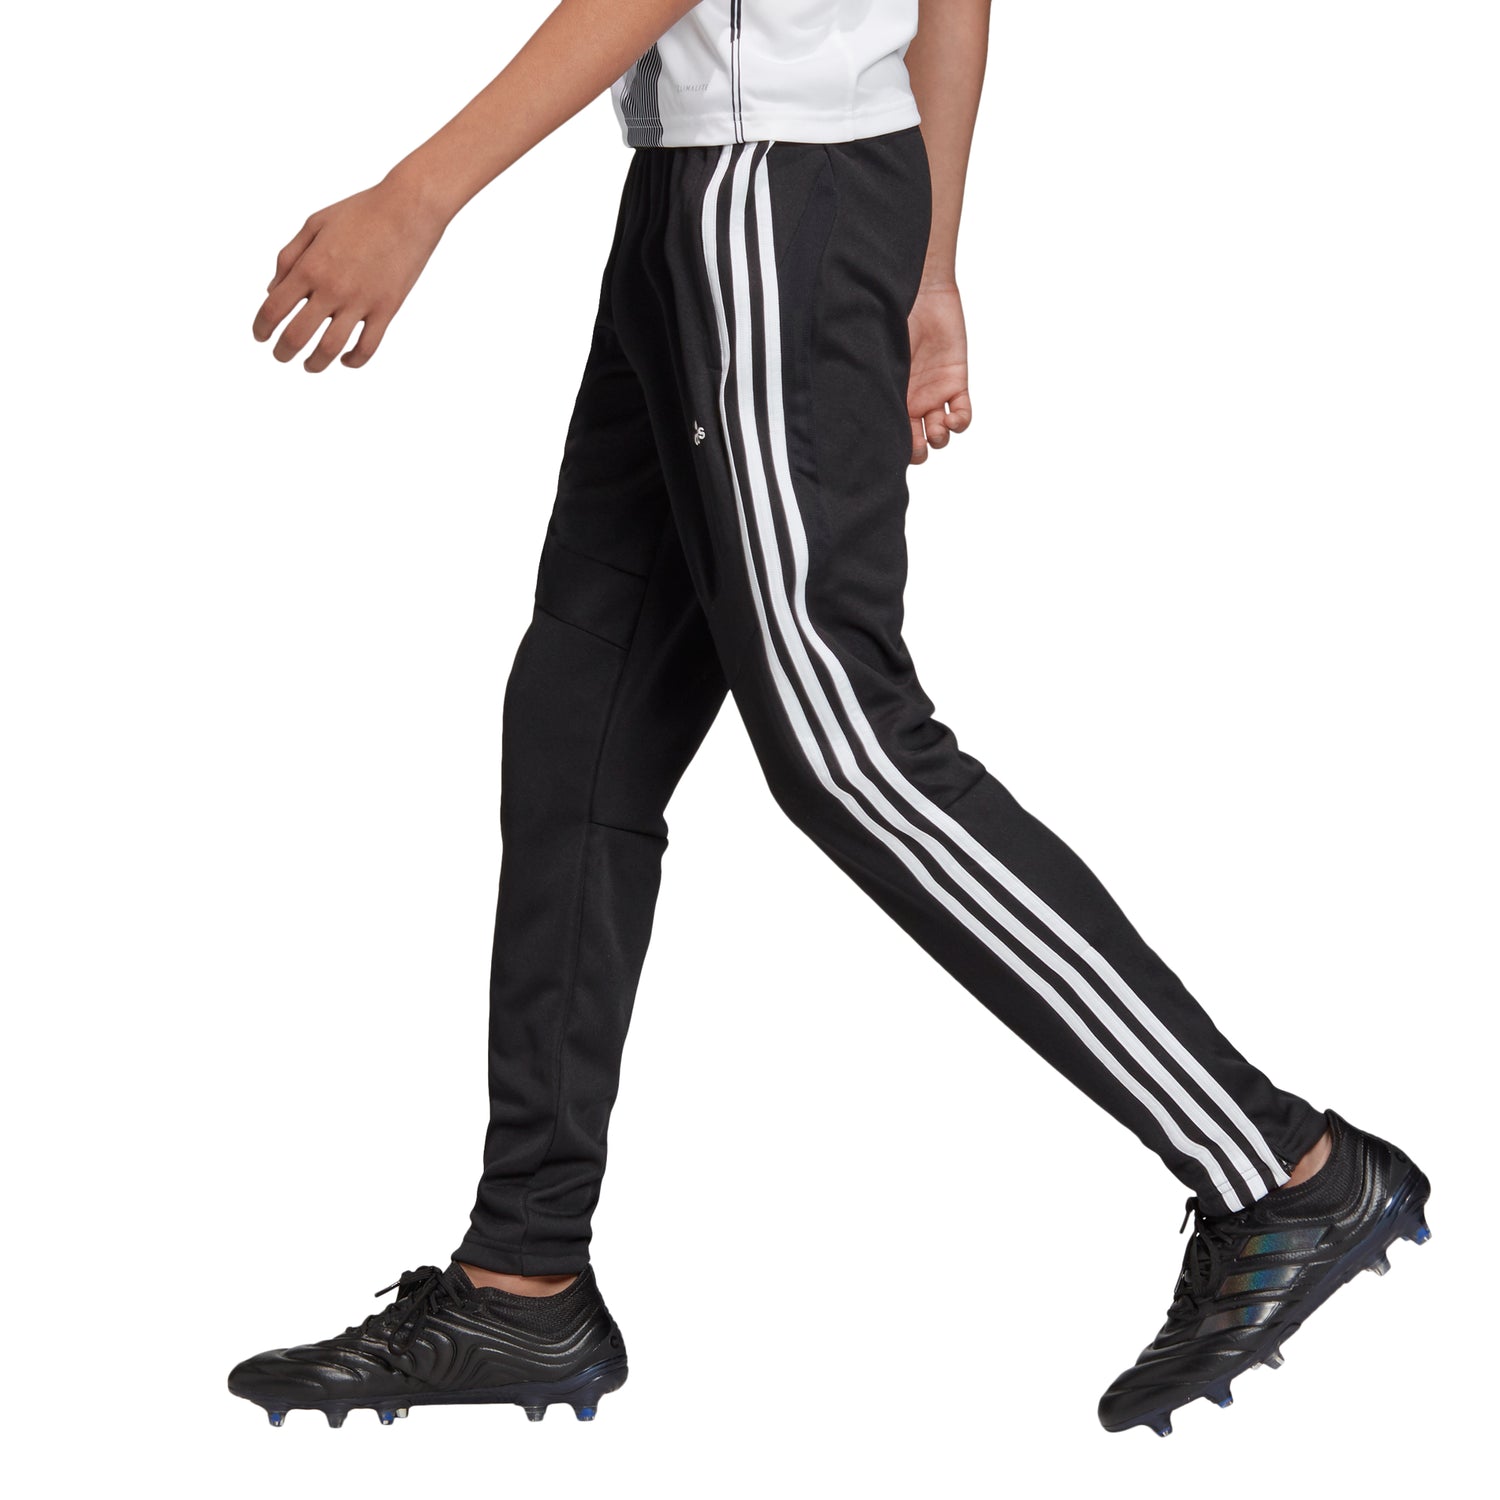 Adidas Youth Lg 14/16 Black Track Pants White Stripes Cuffed Ankle Jogger |  eBay